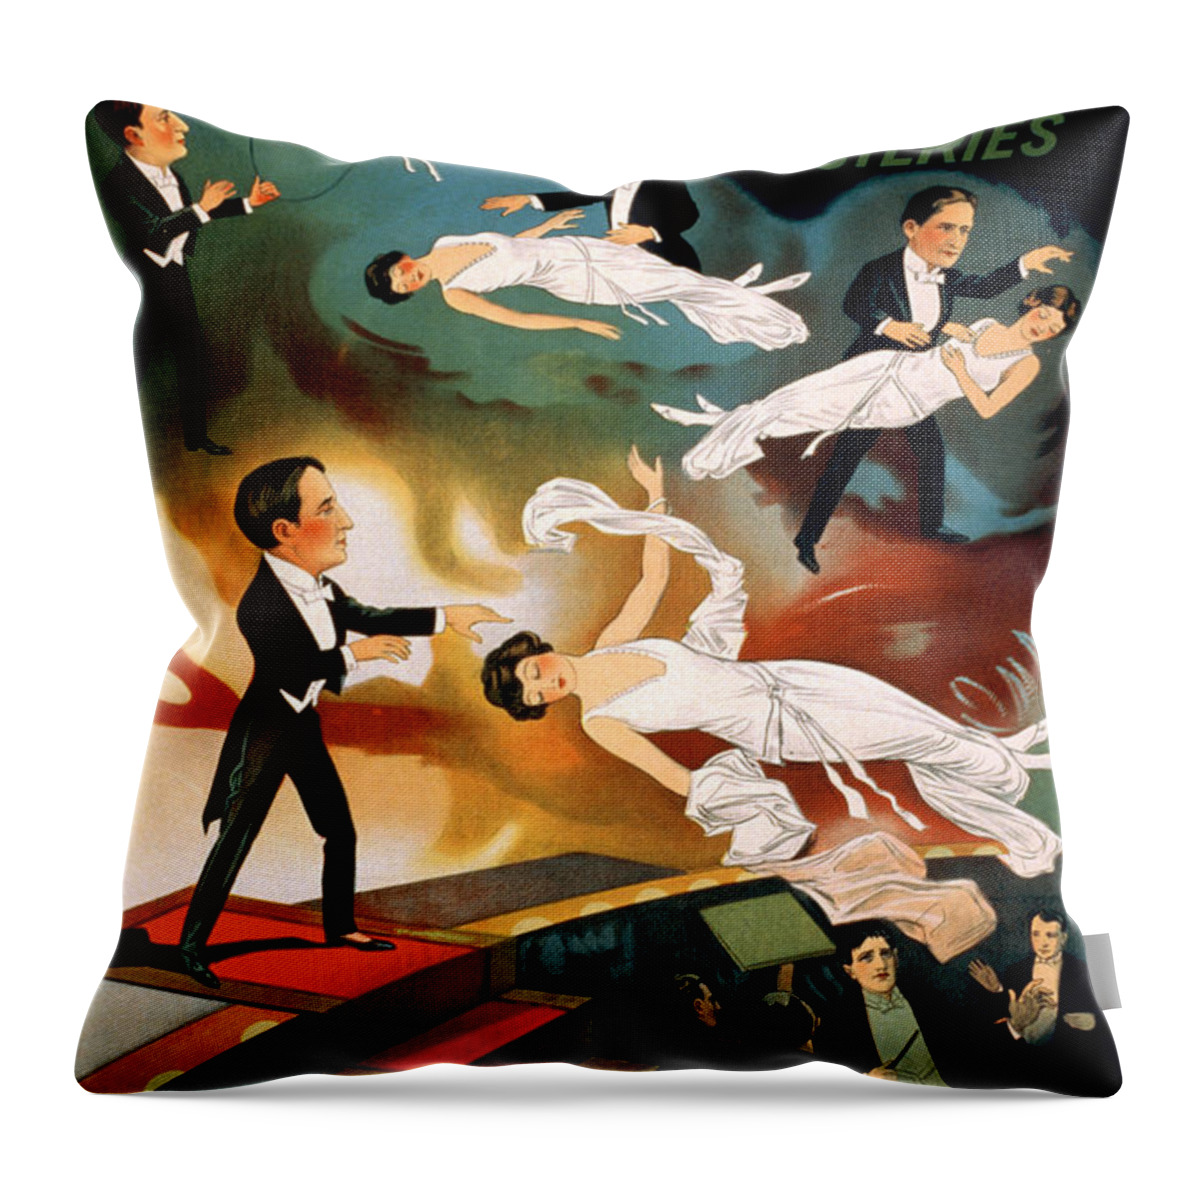 Entertainment Throw Pillow featuring the photograph Howard Thurston, American Magician by Photo Researchers